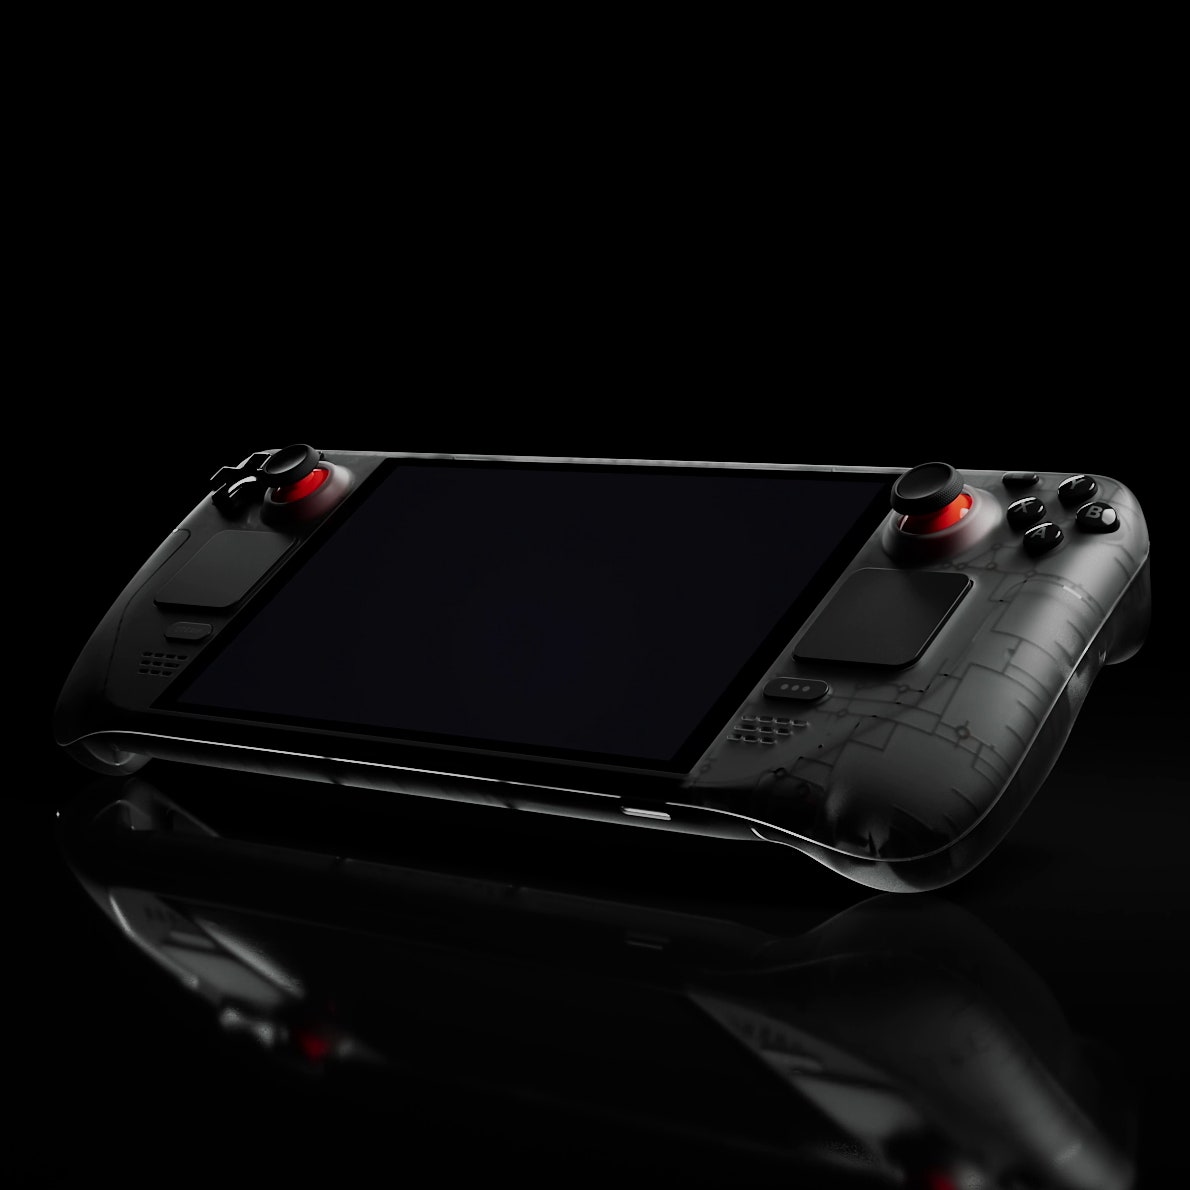 The Valve Steam Deck OLED Is a Brighter, Sharper Way to Play Handheld Games